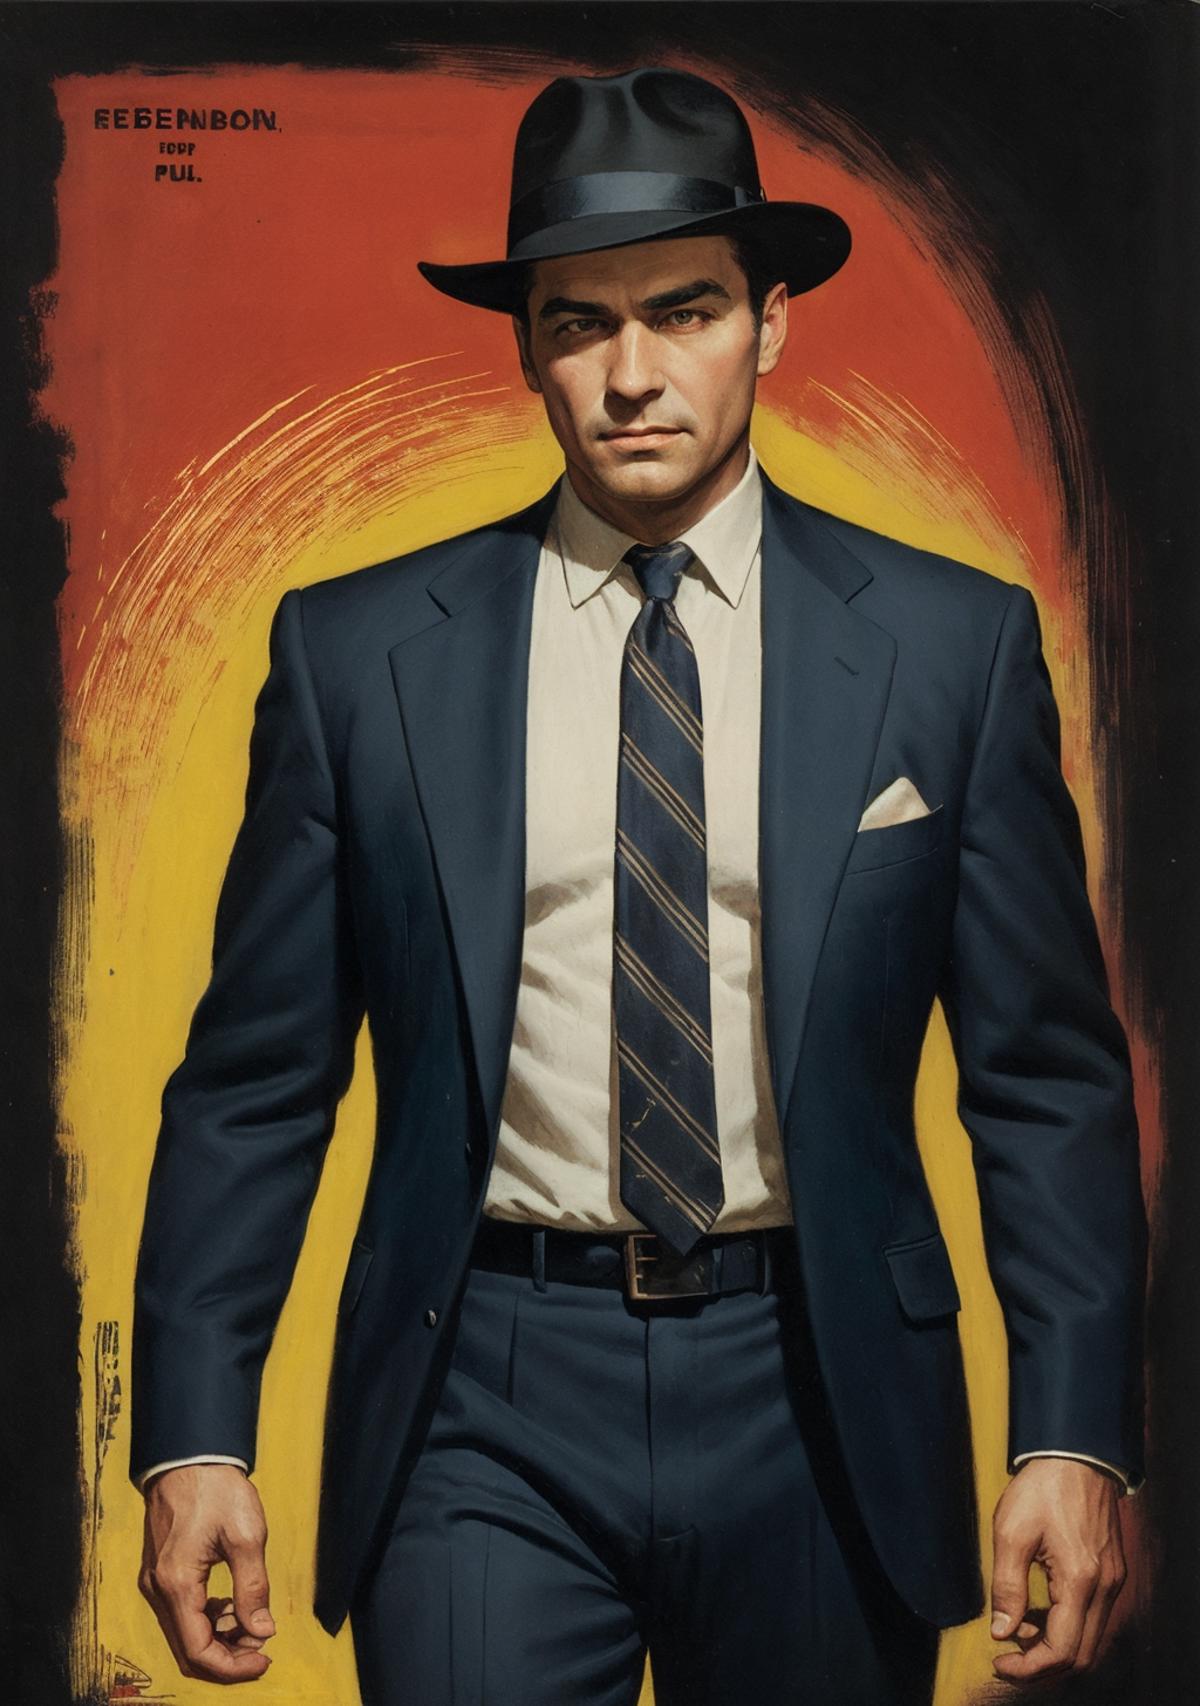 A painting of a man in a suit and tie wearing a fedora.